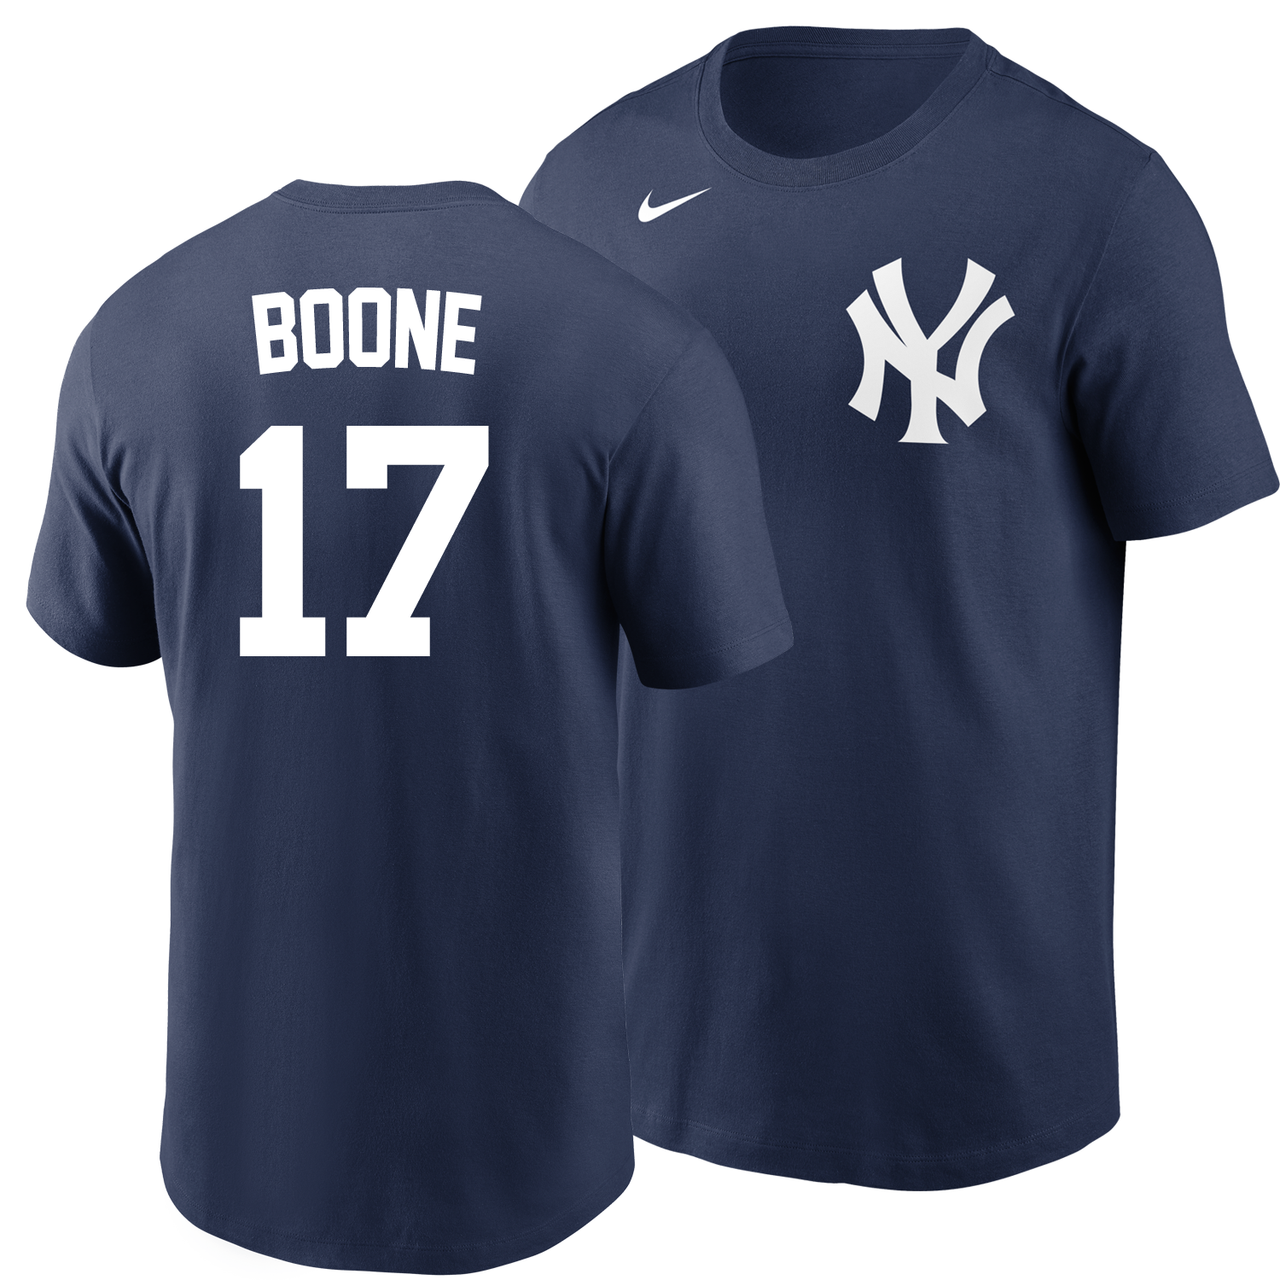 Aaron Boone Jerseys and T-Shirts for Adults and Kids